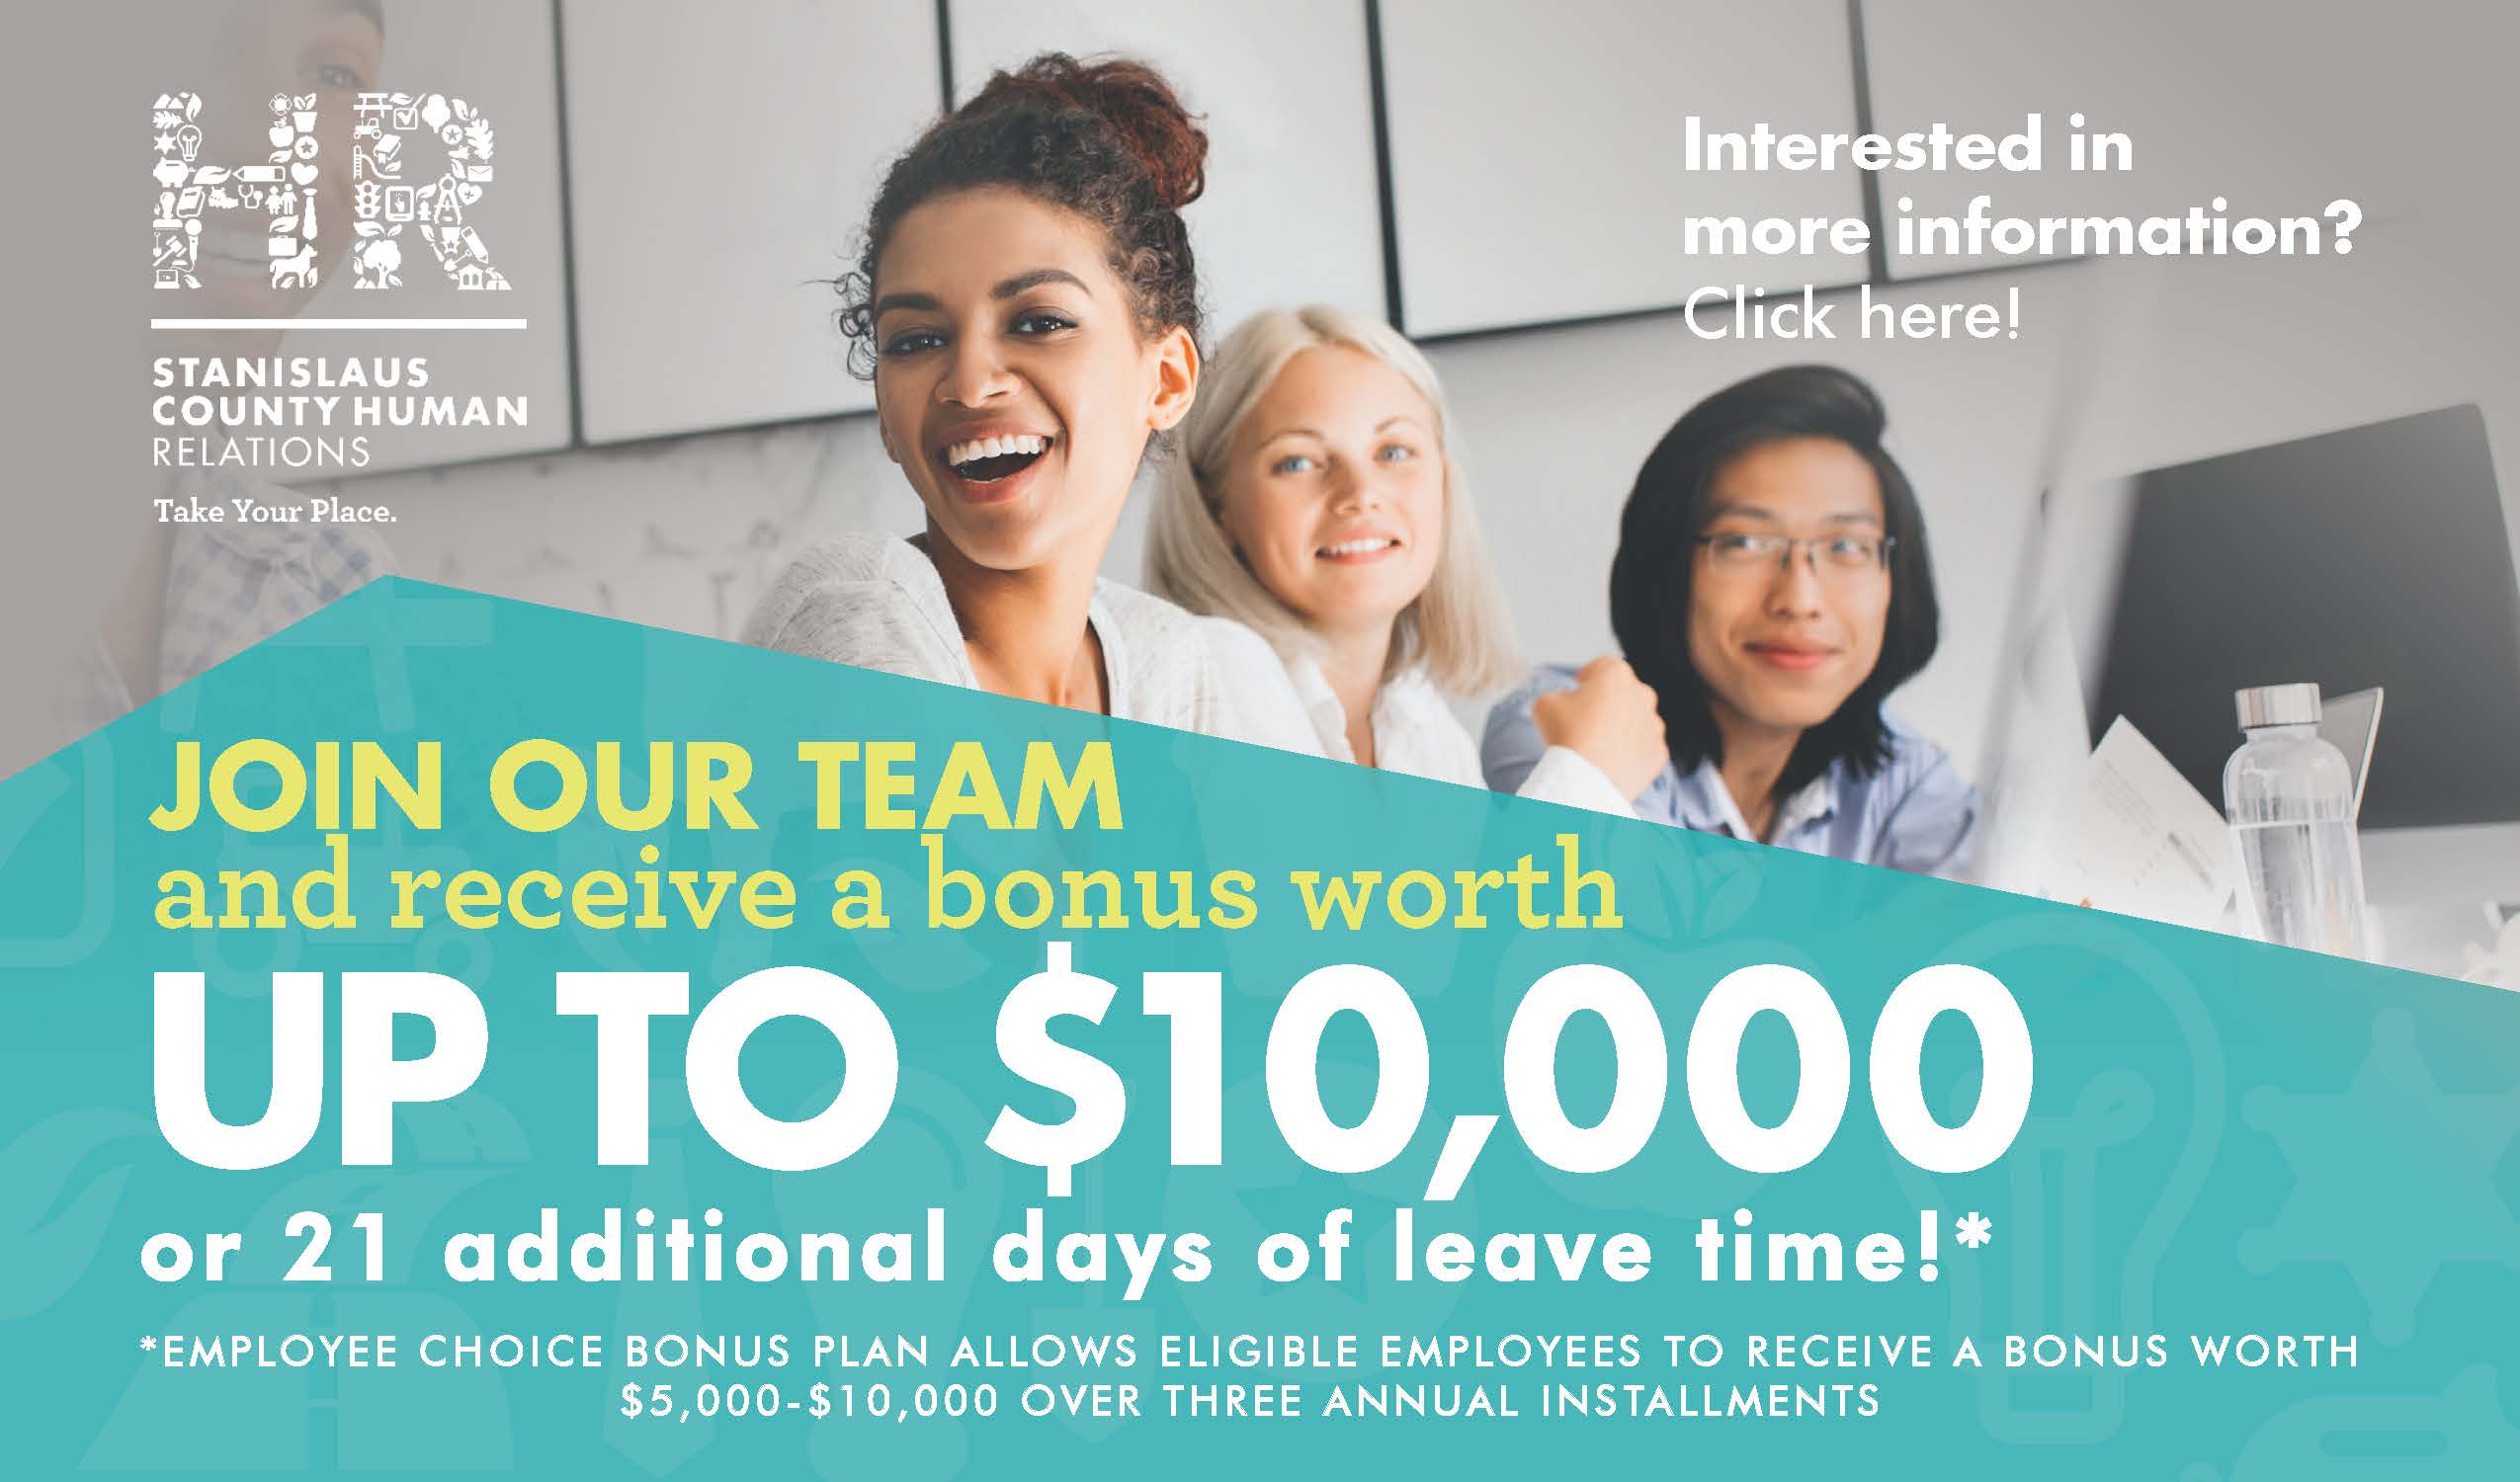 Join our team and receive a bonus worth up to $10,000*